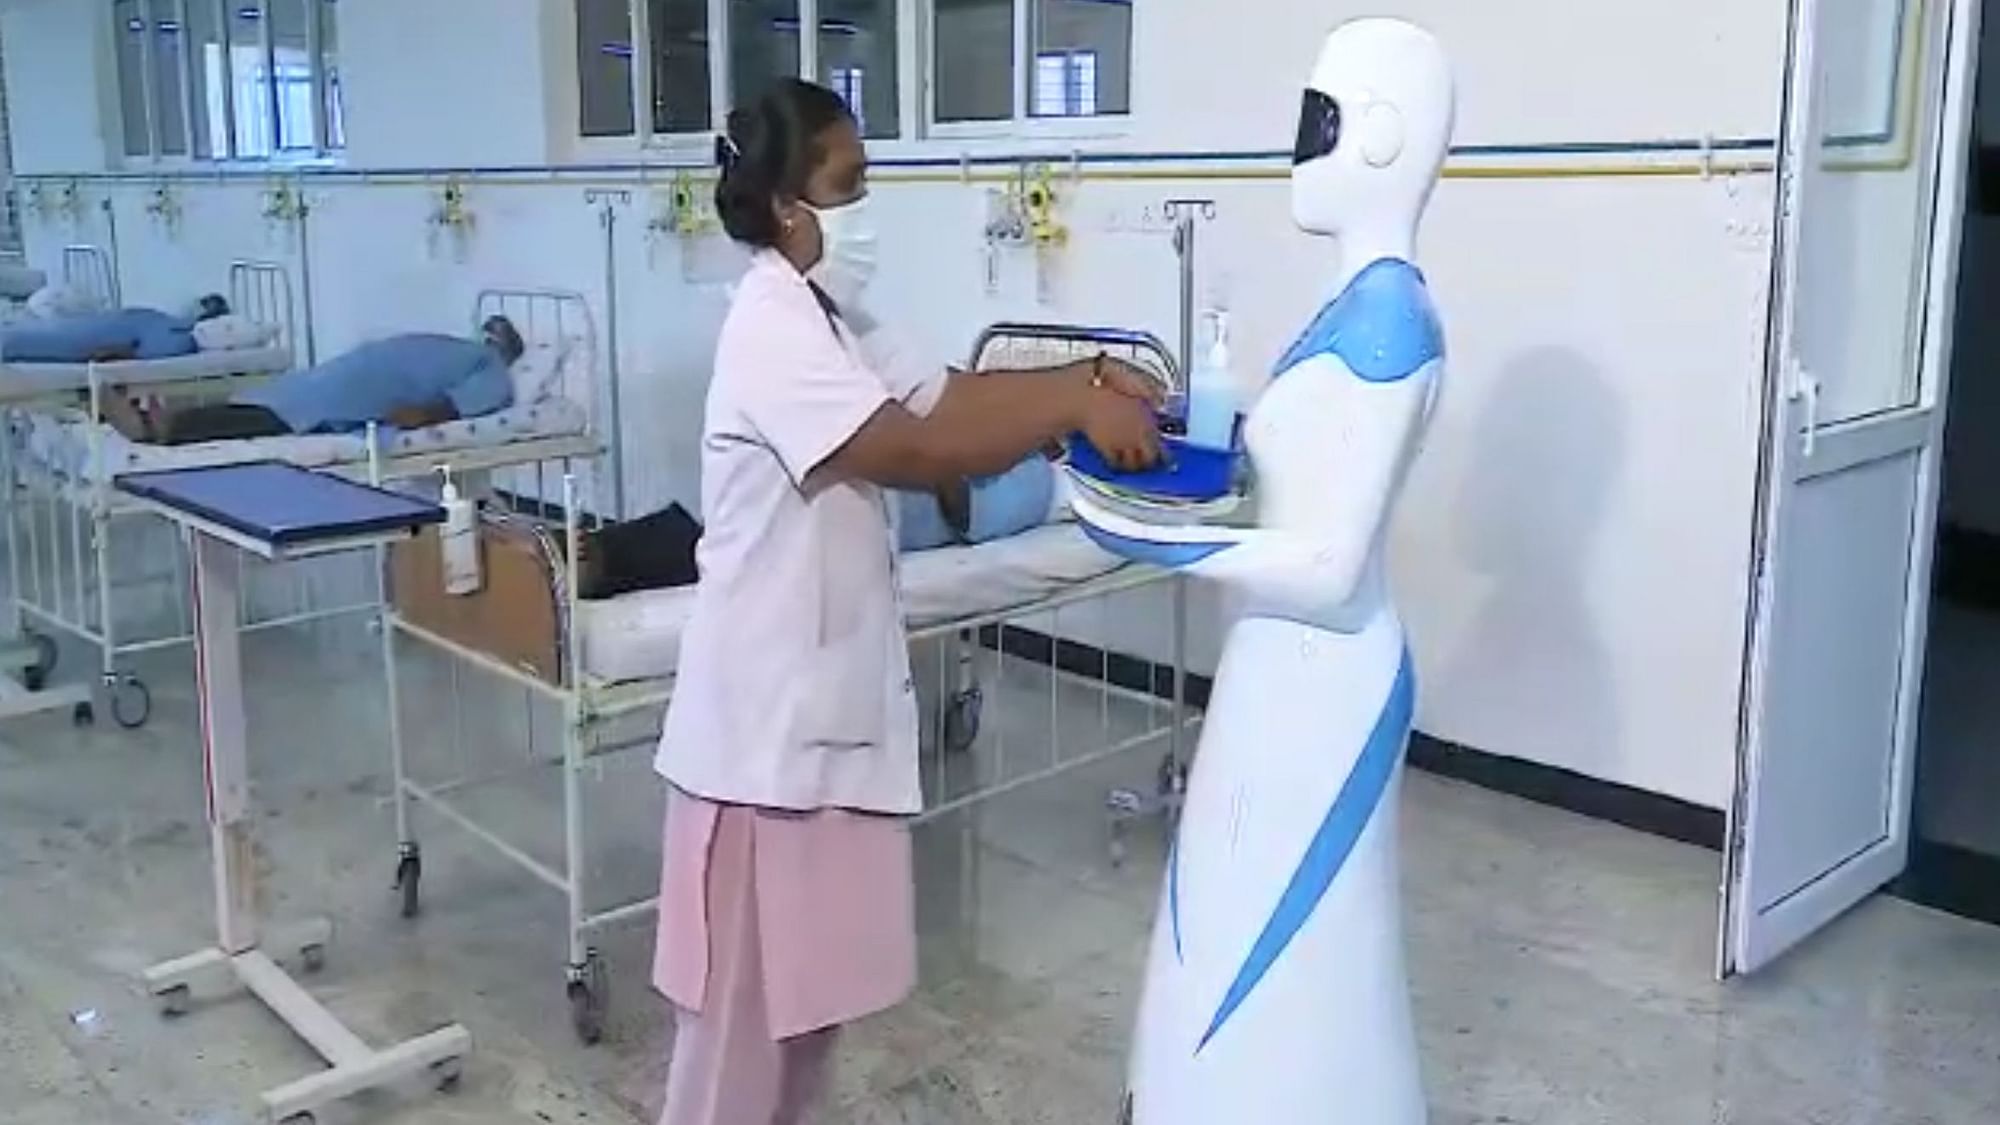 A Coimbatore-based company is creating robots to disinfect spaces with UV rays and provide medicines in isolation wards.